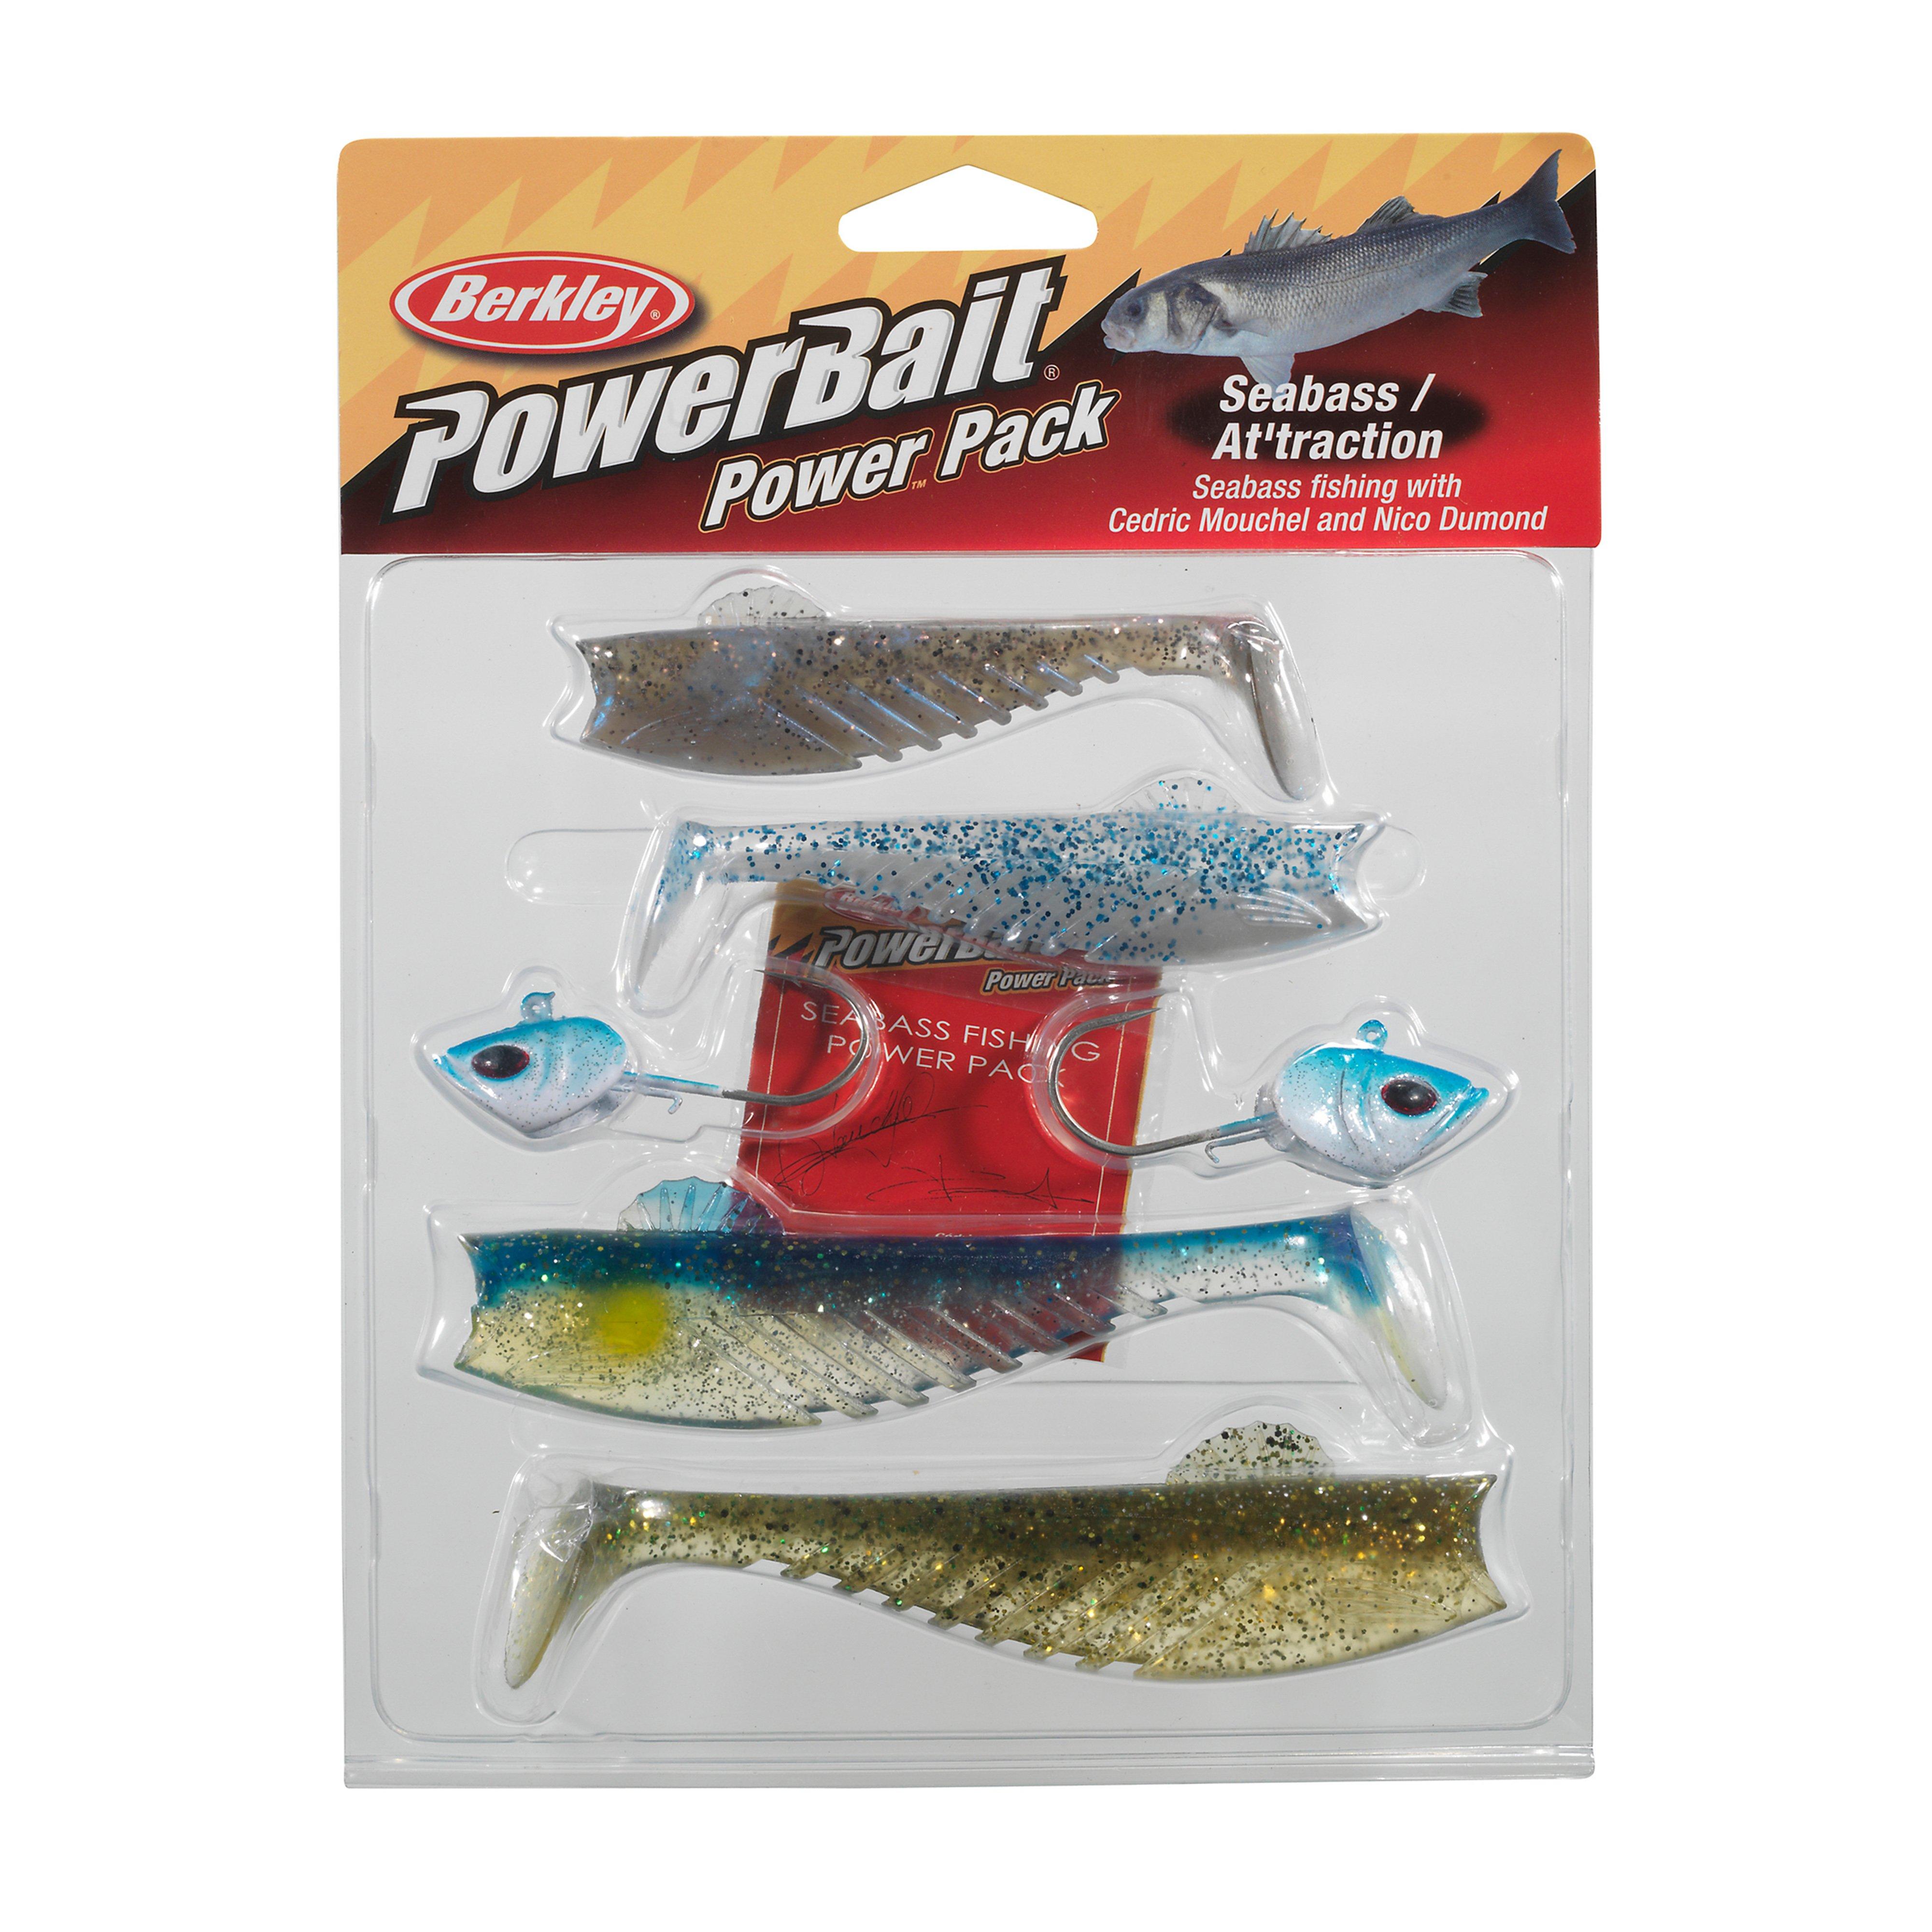 Shakespeare Seabass Pro Pack Review